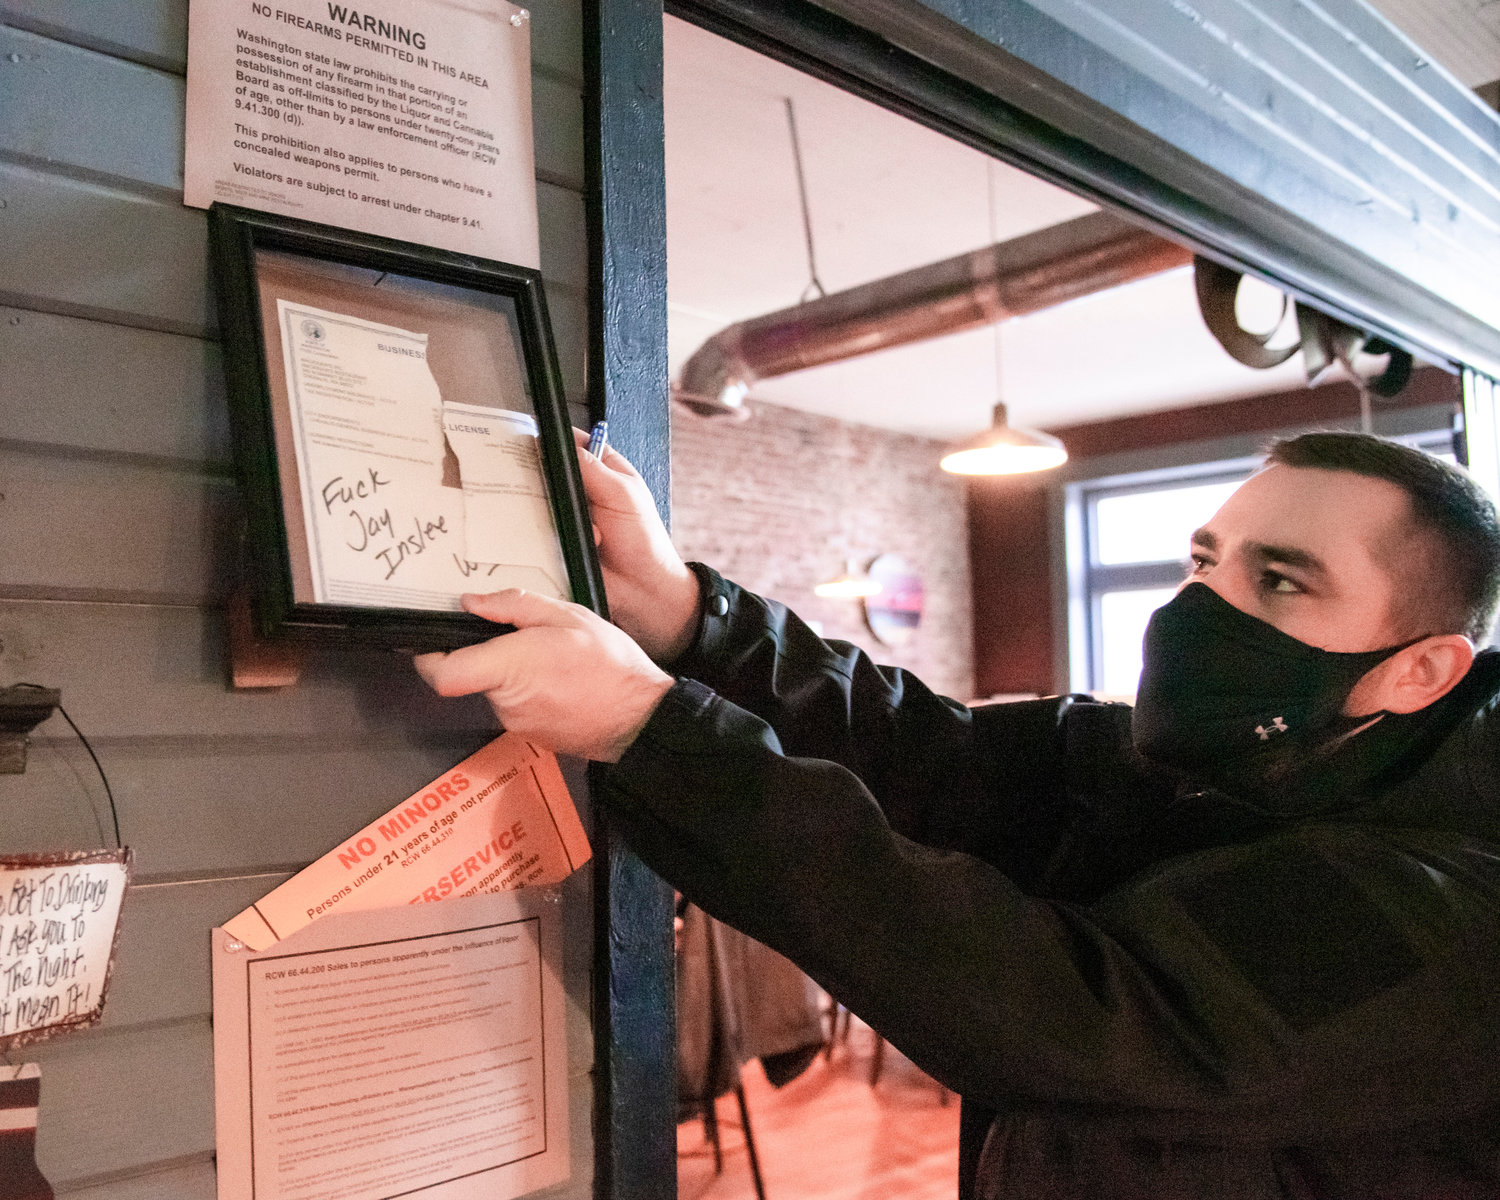 The Mackinaw's business license is removed from the wall Friday at Curious The Bar in Chehalis.